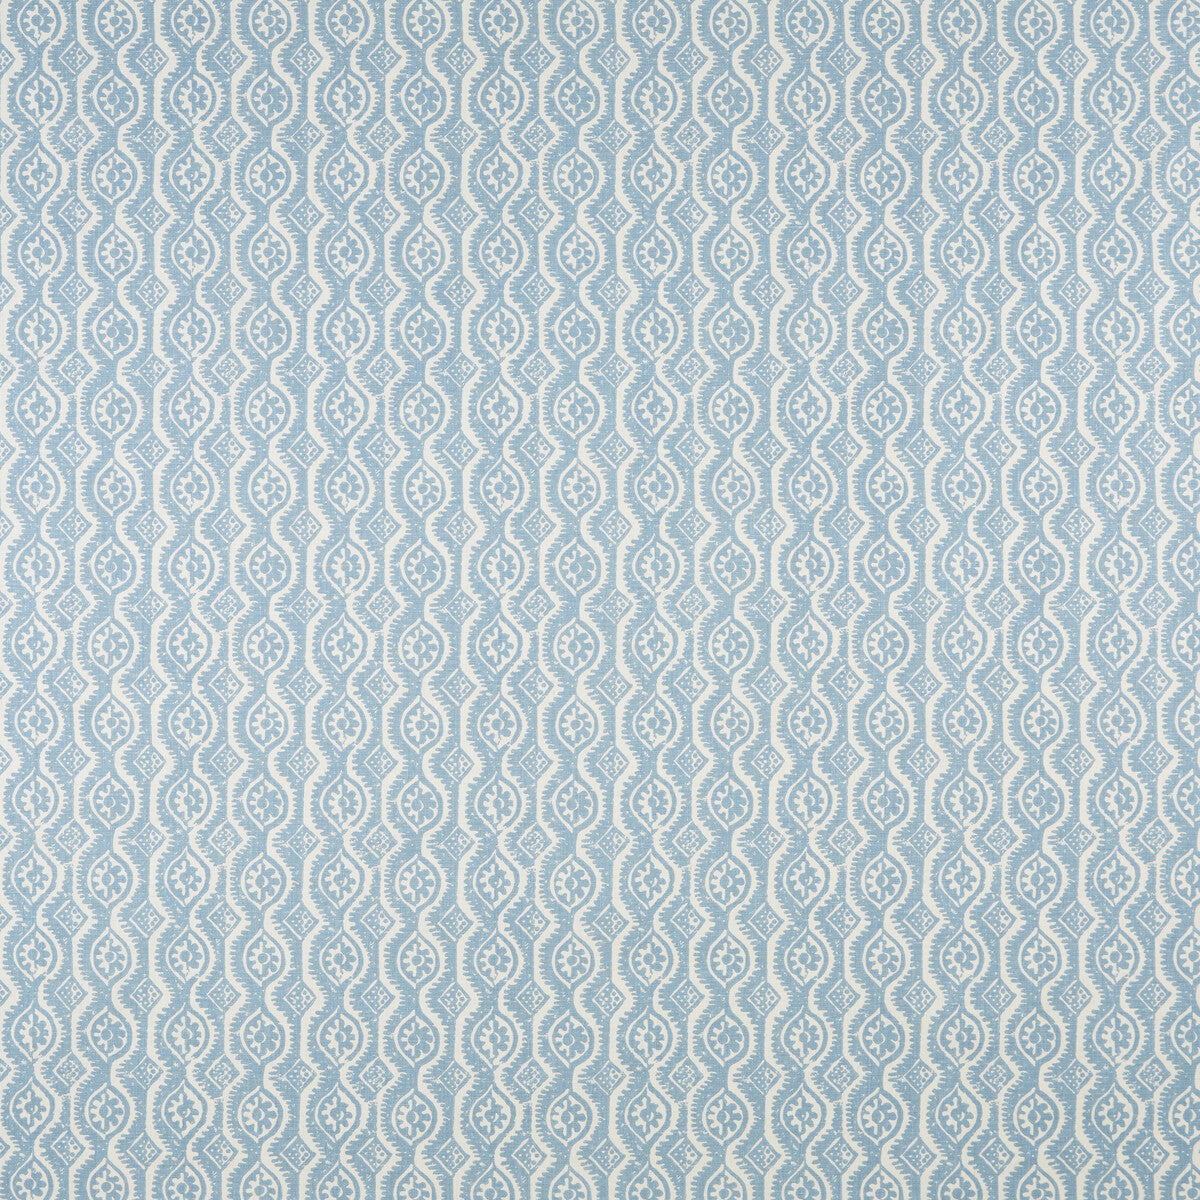 Small Damask fabric in blue color - pattern BFC-3642.5.0 - by Lee Jofa in the Blithfield collection